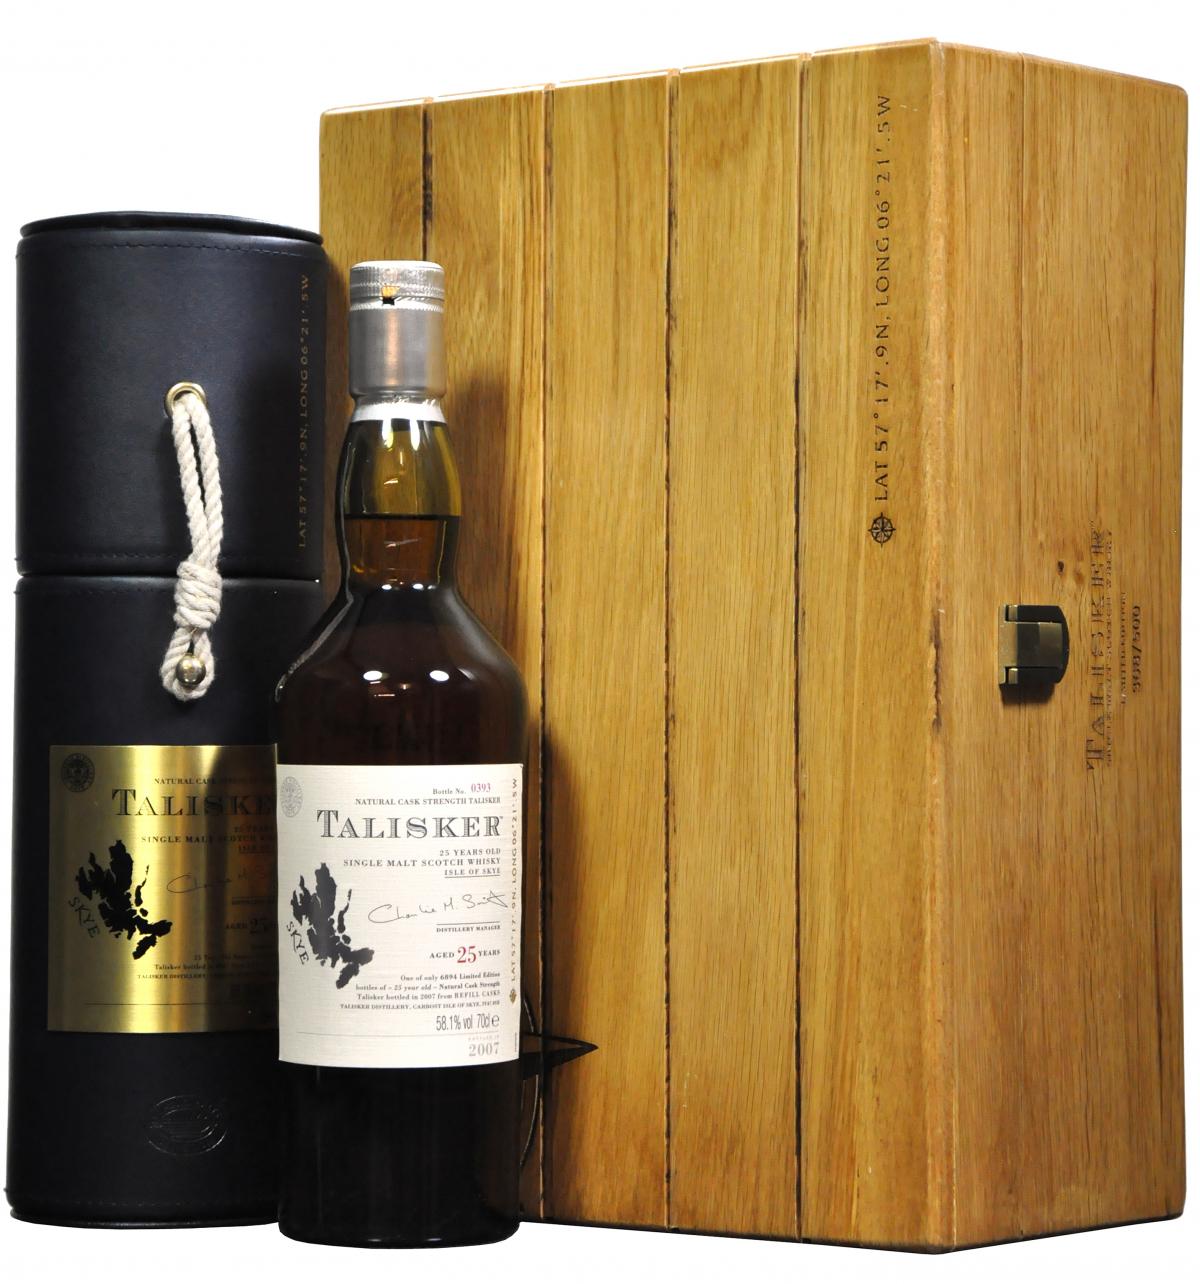 talisker sea chest 25 year old limited edition single malt scotch whisky